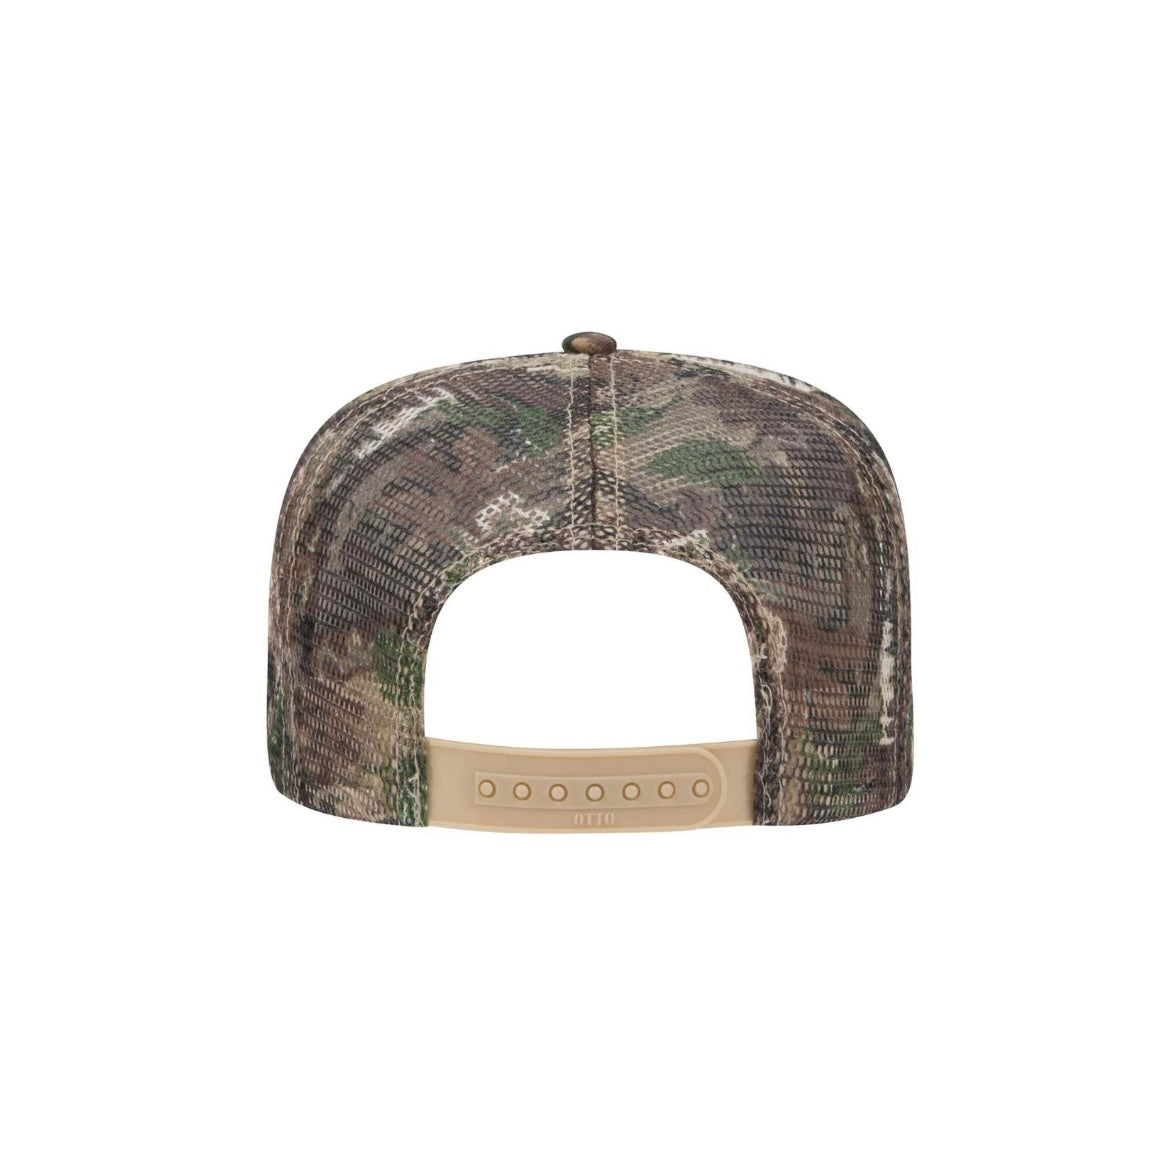 Limited Hunting Camo 5 Point Snapback Mesh Back White Logo Embroidery